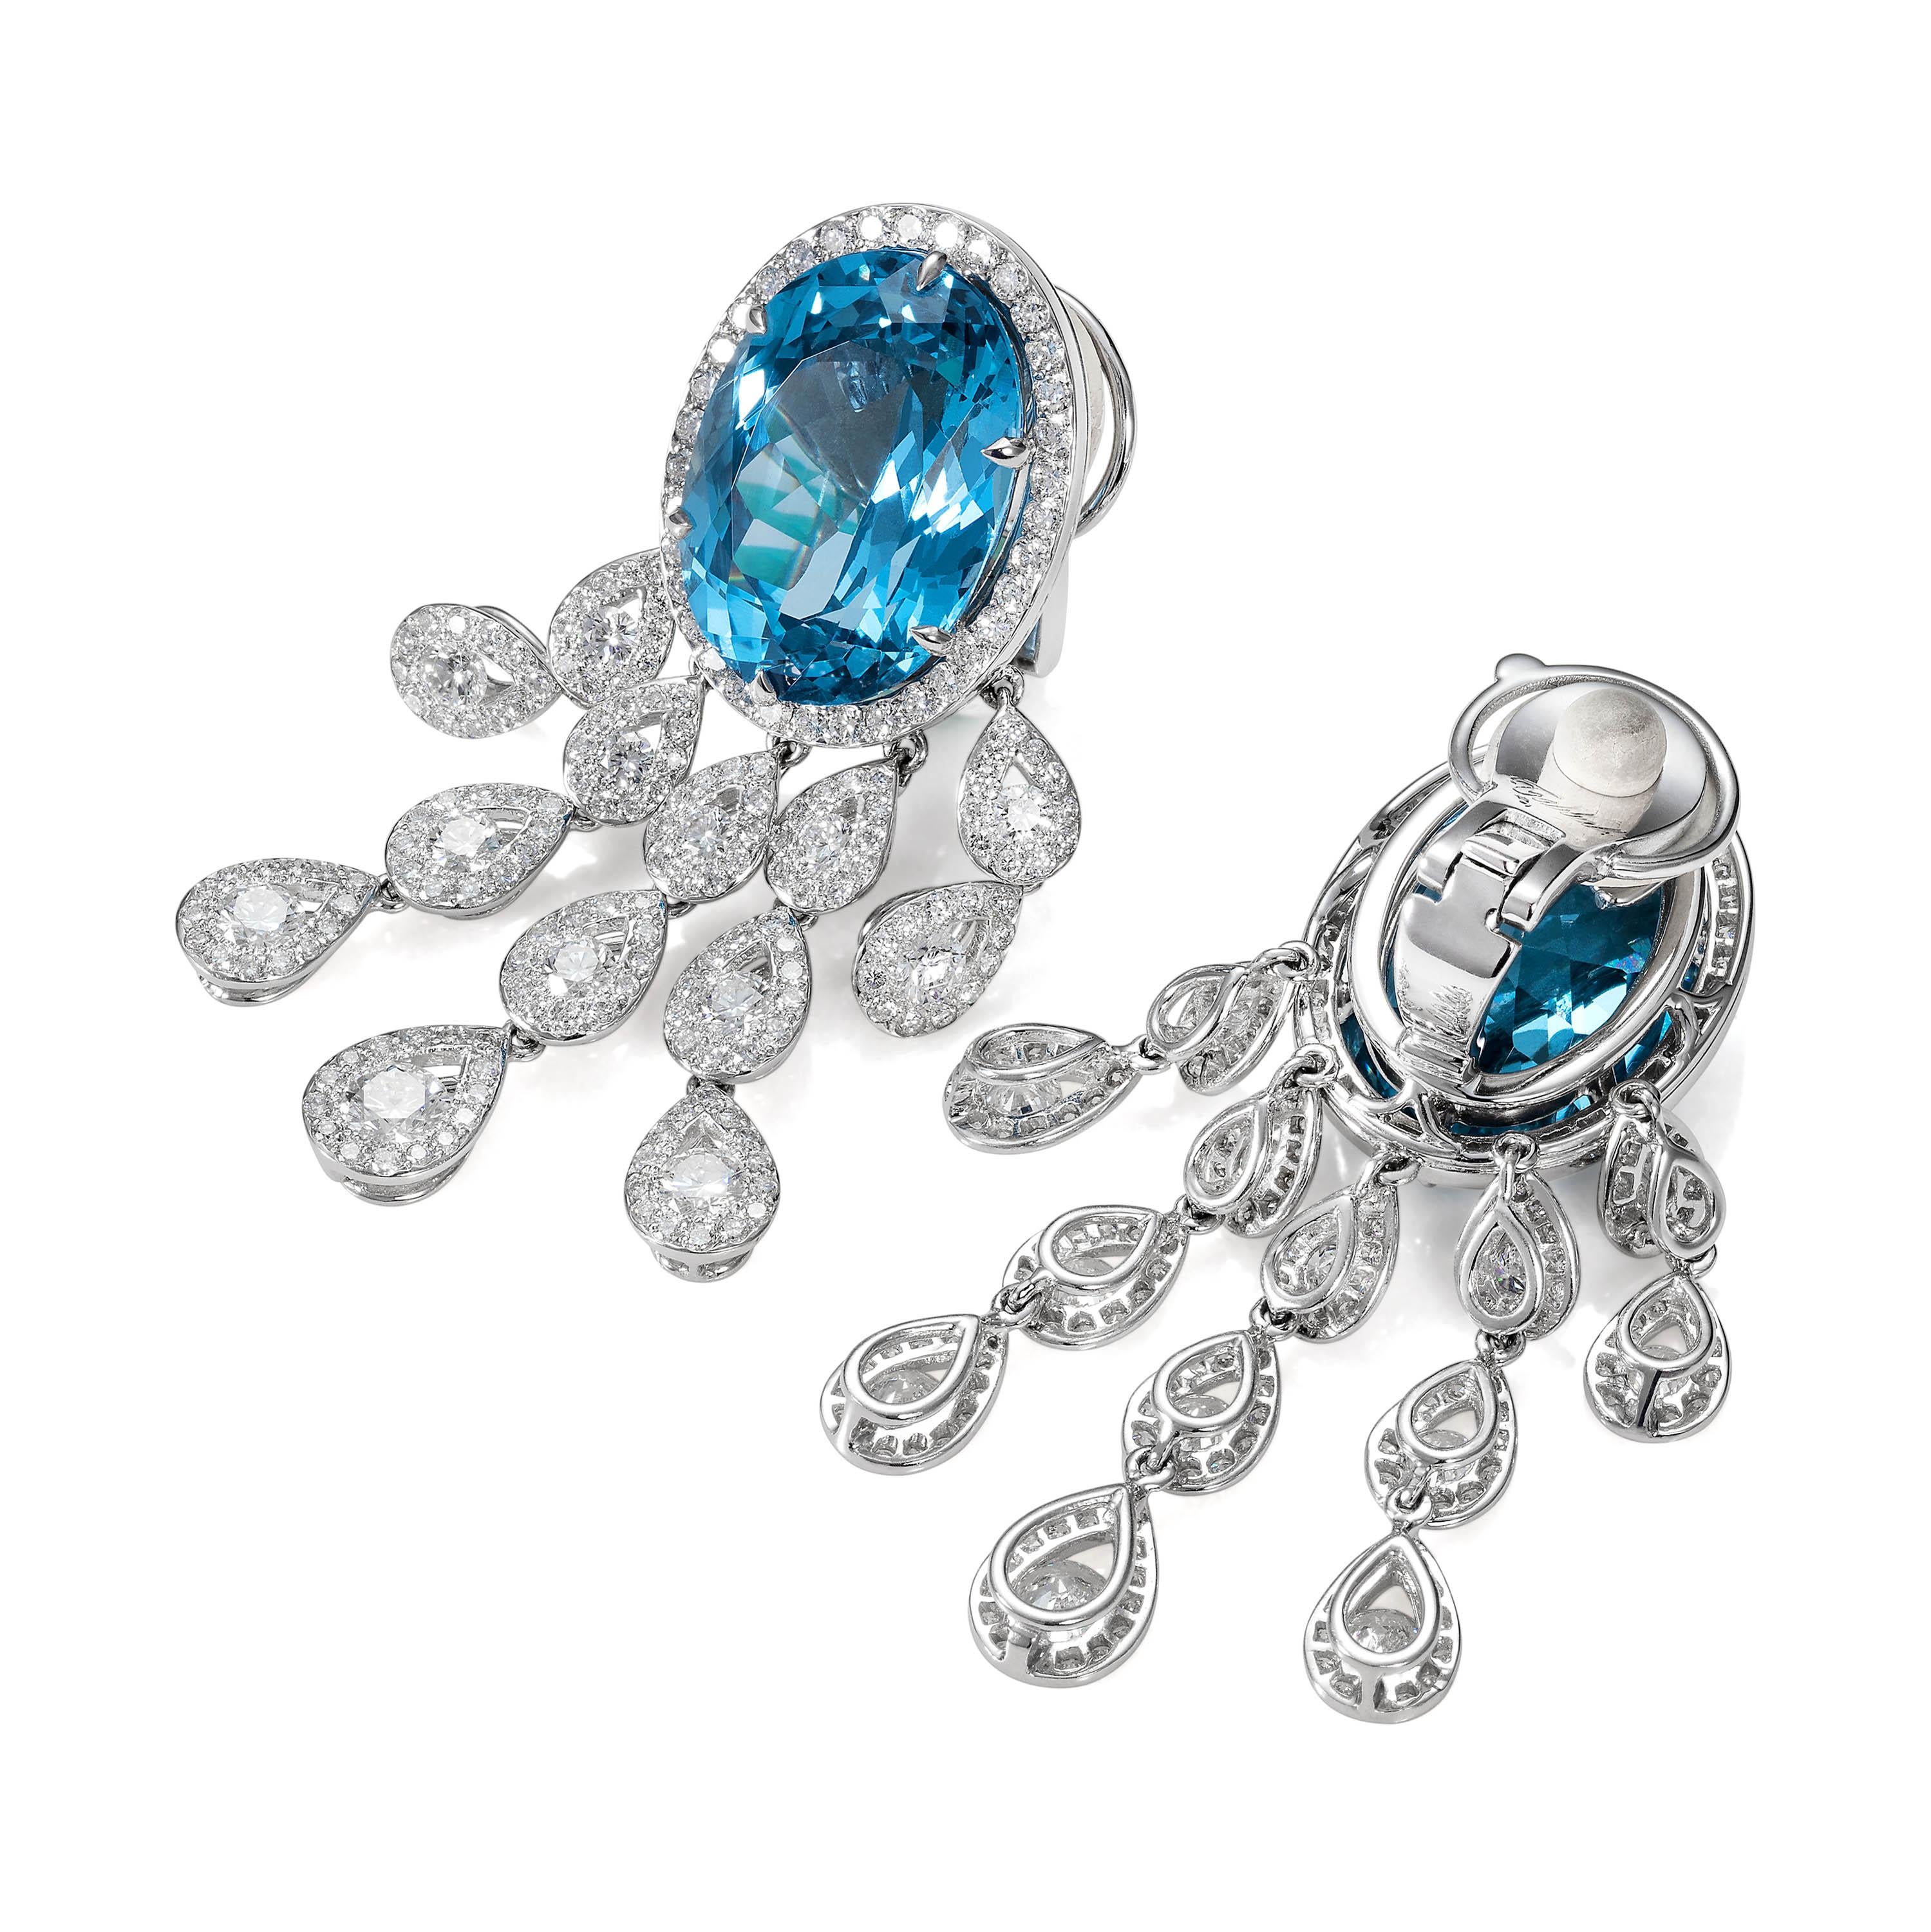 Pair of faceted blue topaz earrings weighing 28.85 carats with 412 round diamonds weighing 5.00 carats.
Crafted in 18k white gold

Earring legth: 4.3 cm

These earrings come complete with a Tabbah presentation box and certificate of authenticity.